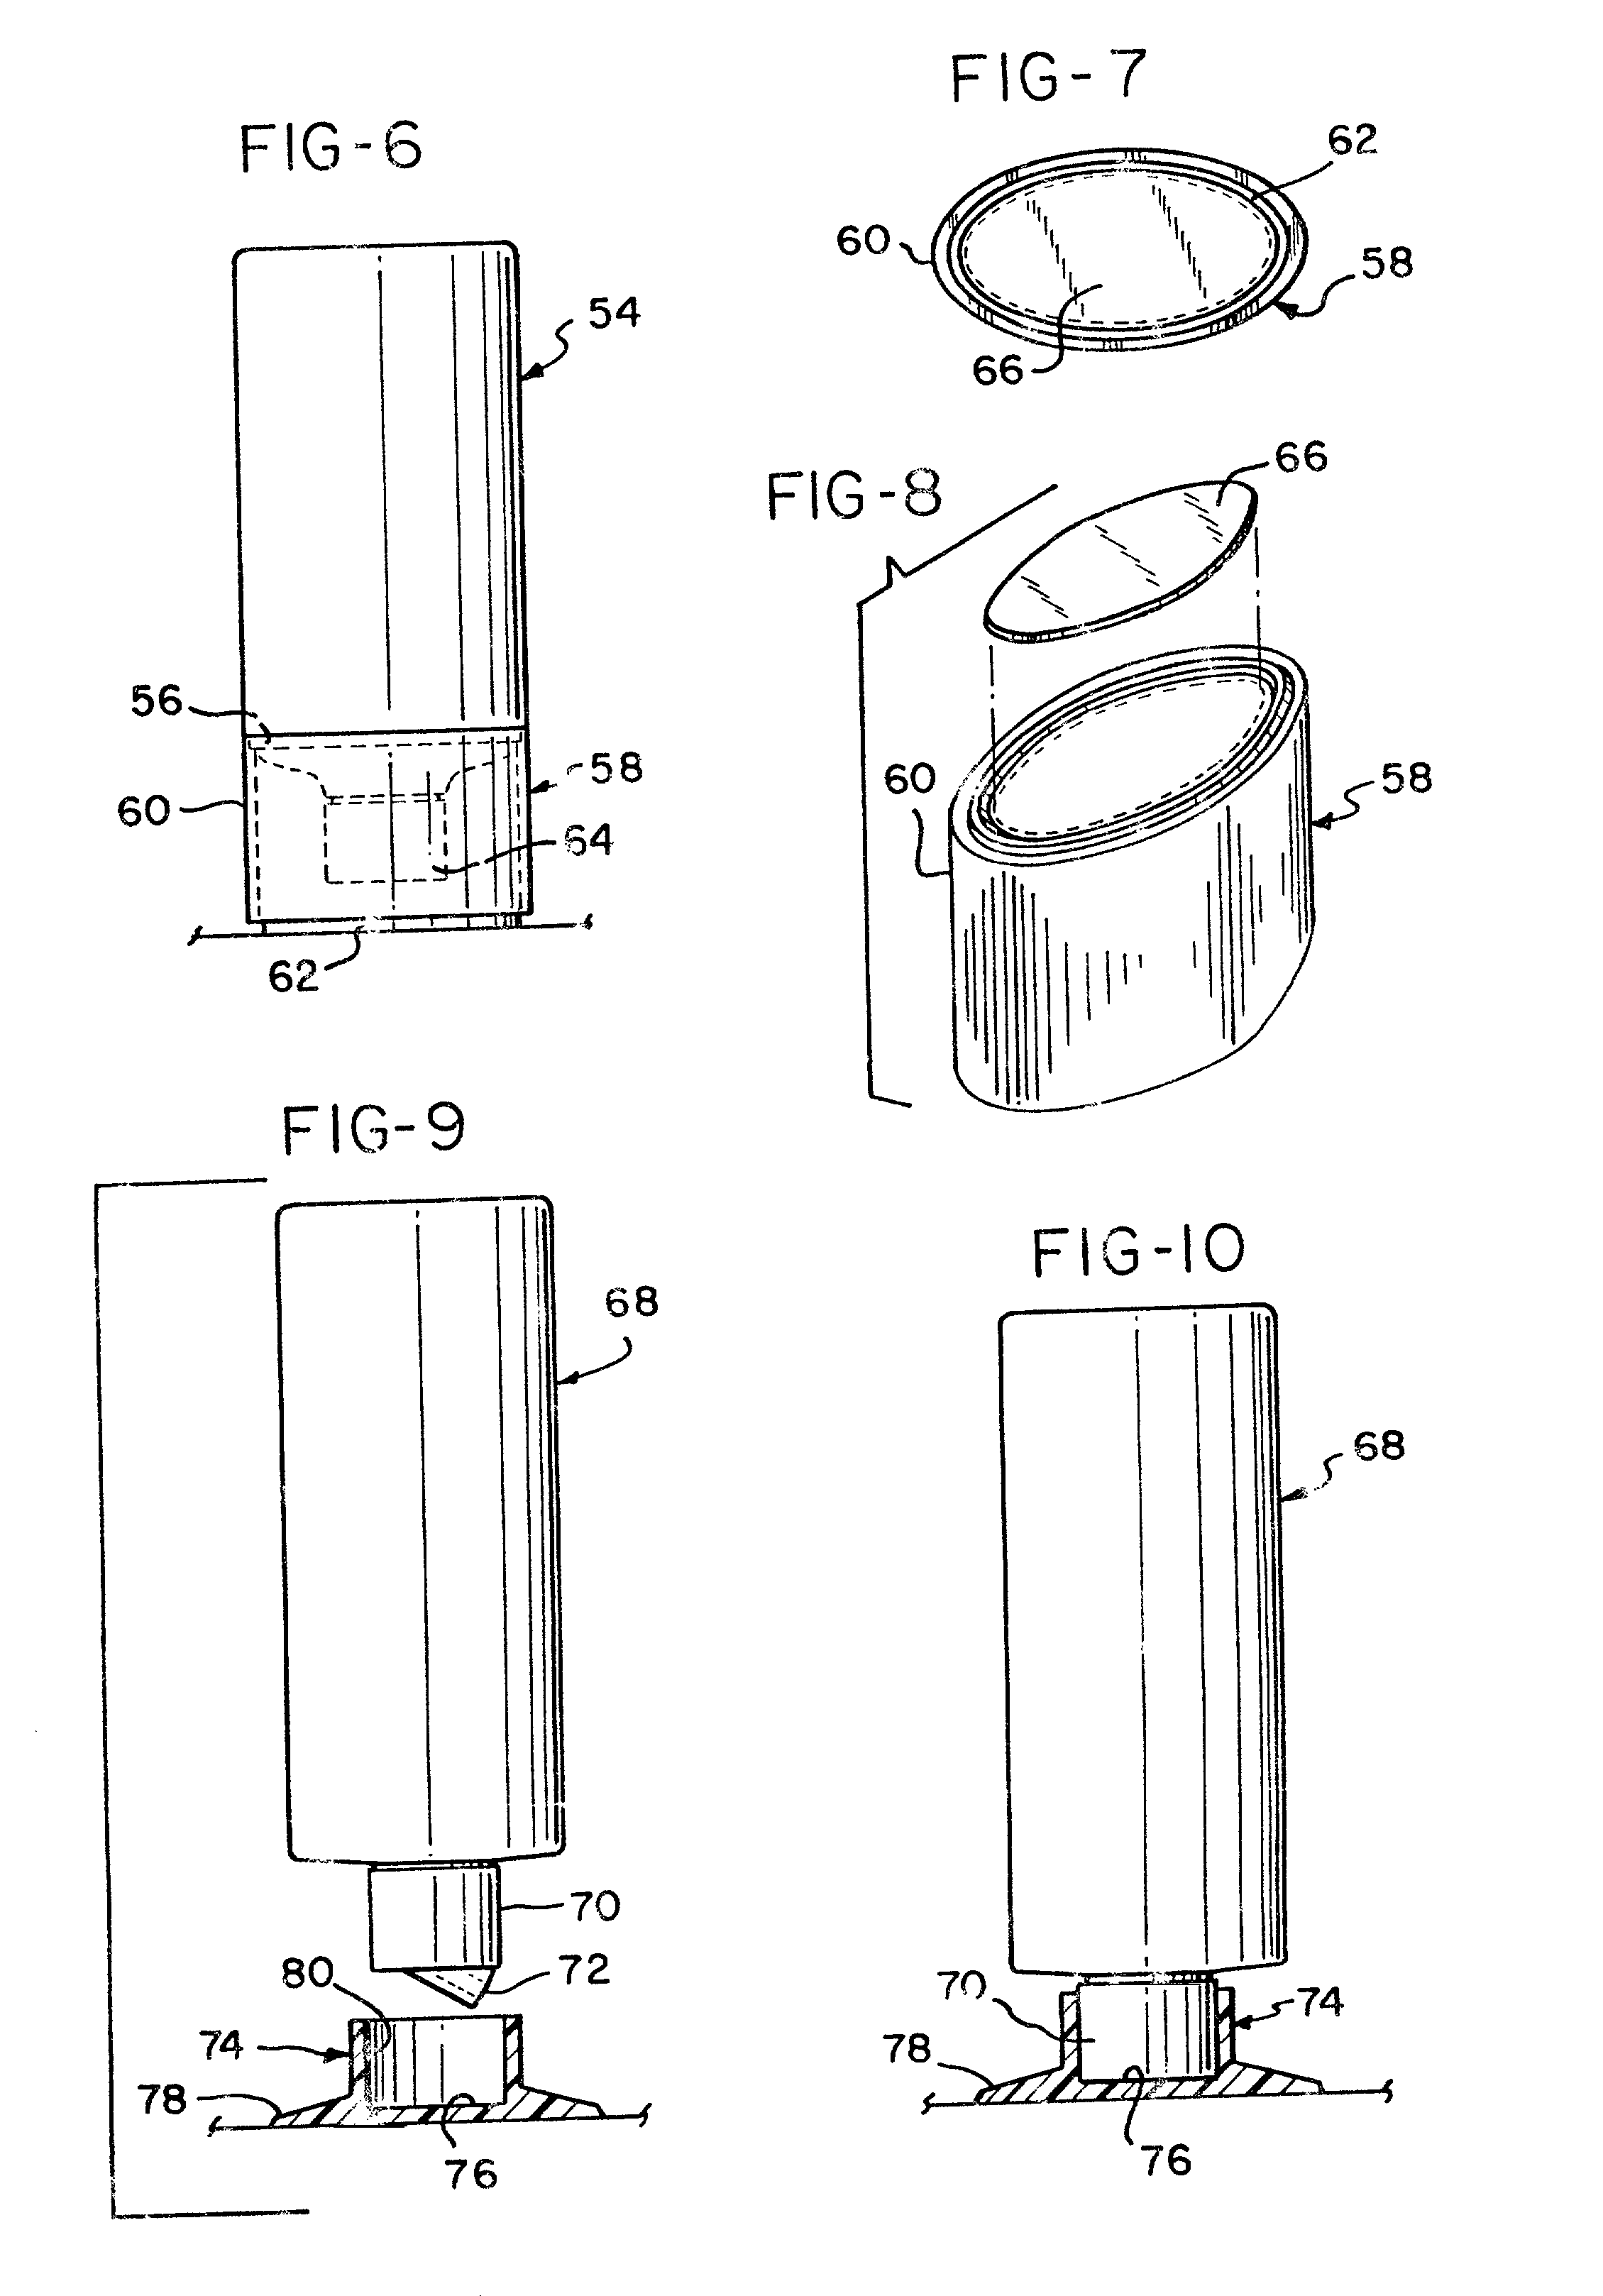 Dispensing devices with bottom outlet for dispensing viscous liquids